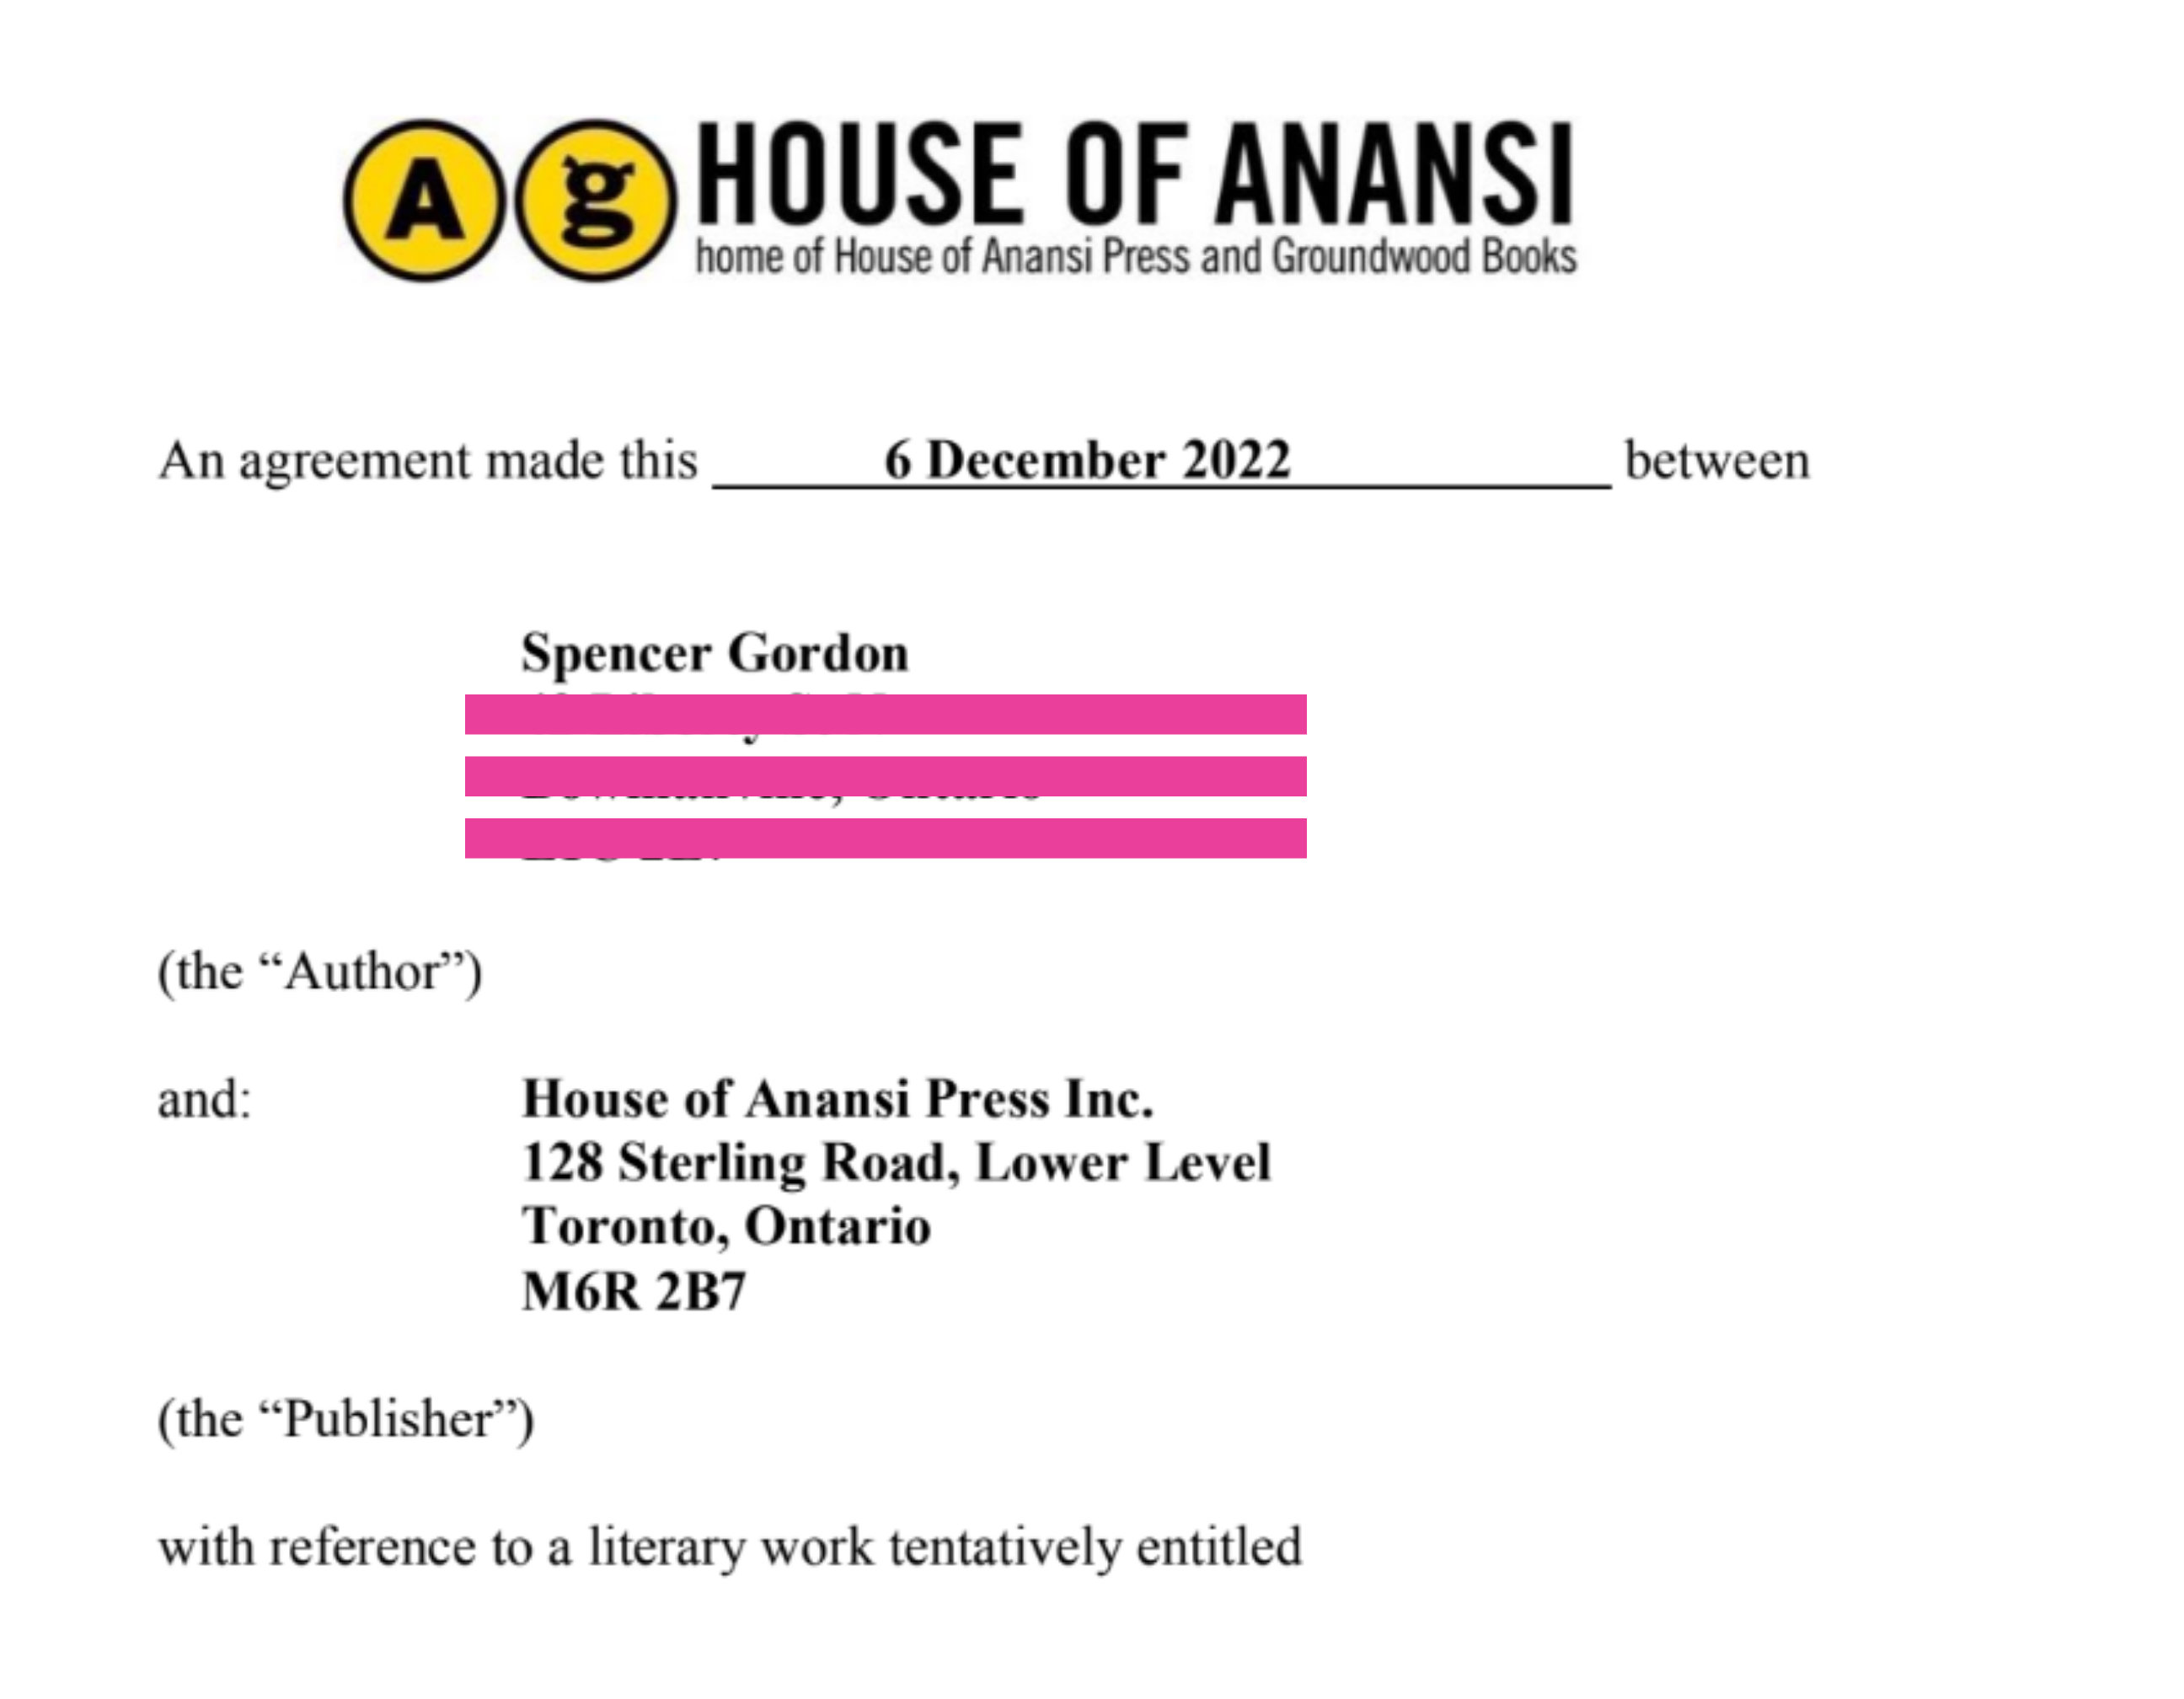 Book contract for new manuscript between me and House of Anansi Press.